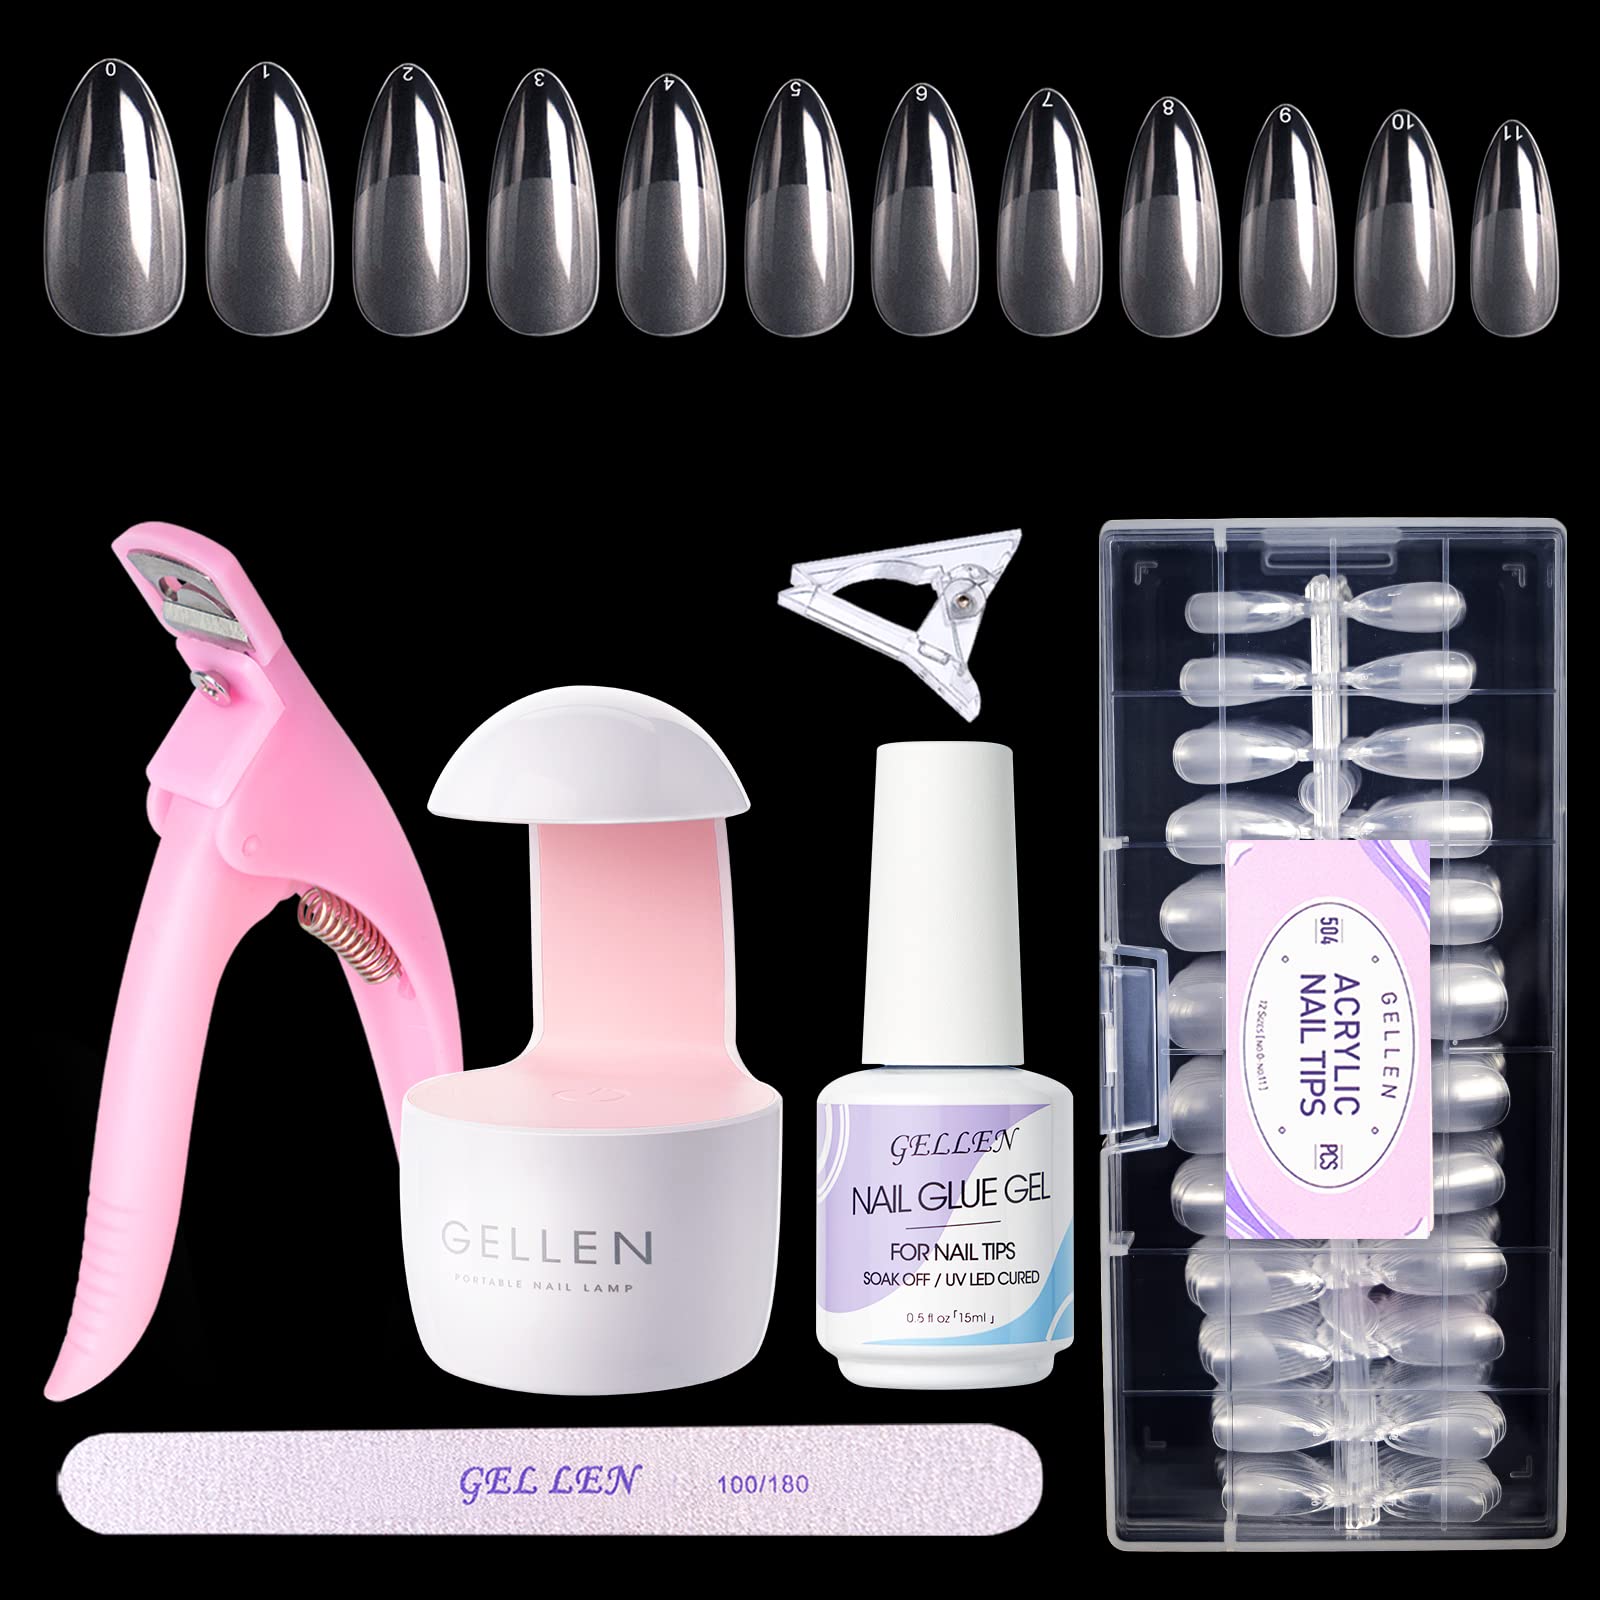 Buy COSLIFESTORE- Press on nails - pack of 24 reusable gel nail extensions  COLOURED nails with full application kit consisting of buffer manicure  tool, 24 jelly tabs- DIY nail art kit (PINK)